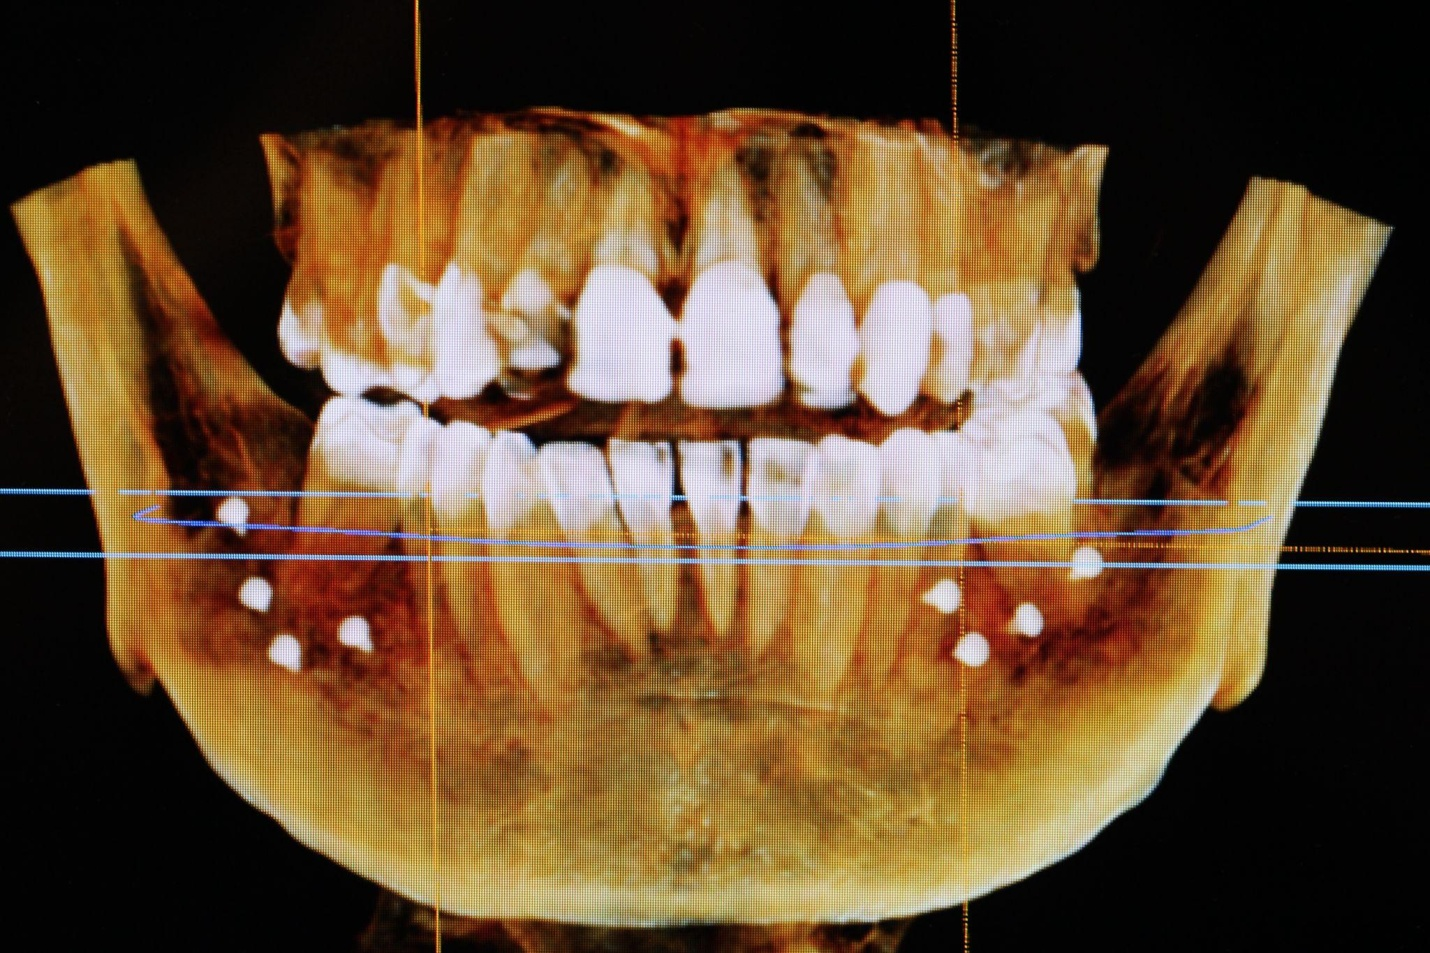 An x-ray of a patient’s mouth